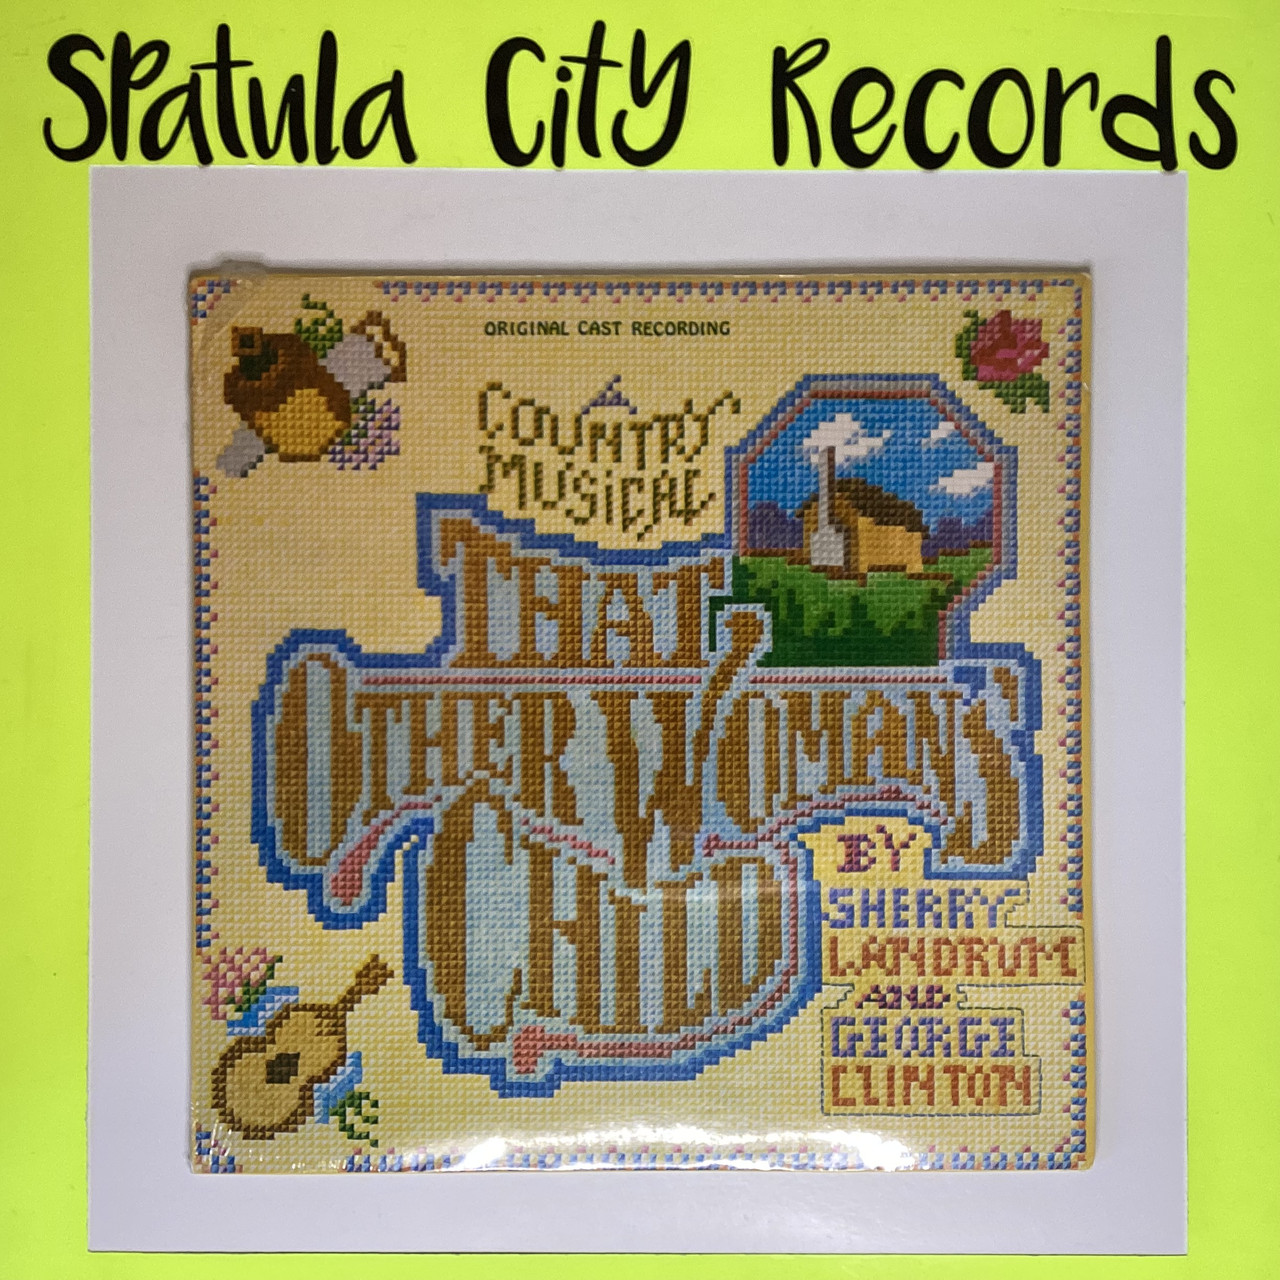 Sherry Ann Landrum, George Clinton – That Other Woman's Child - soundtrack - SEALED - vinyl record LP